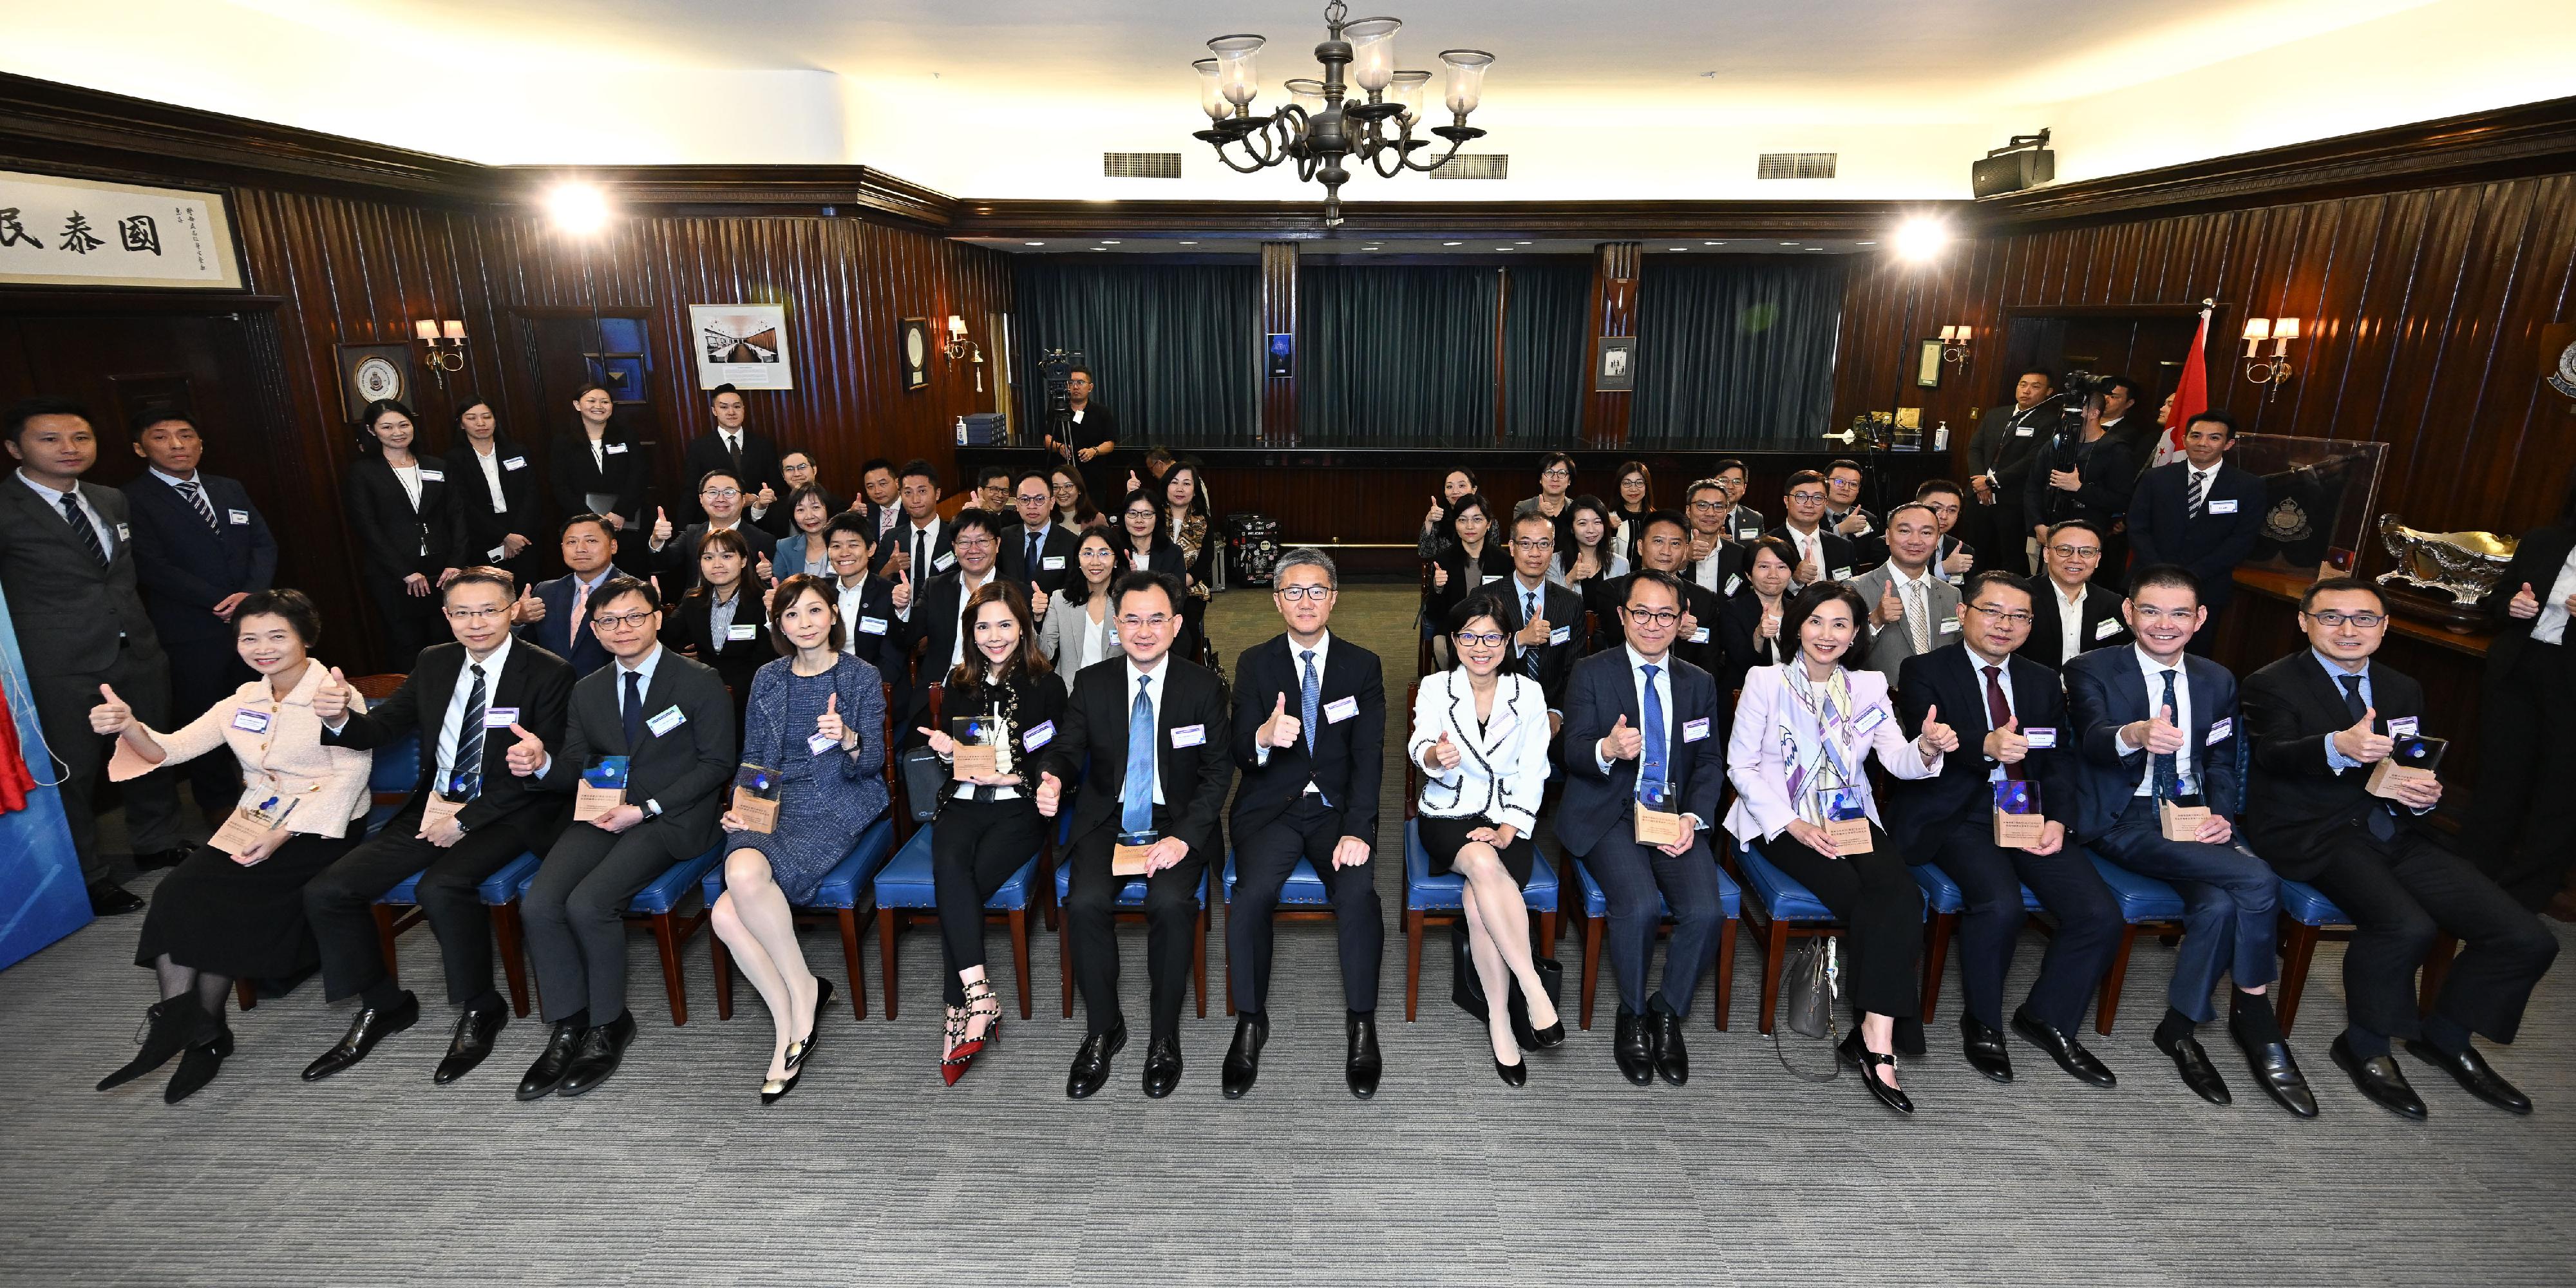 The Hong Kong Police Force (HKPF) held the inauguration ceremony for the Anti-Deception Alliance today (November 24). Photo shows the Commissioner of Police, Mr Siu Chak-yee (front row, seventh left); the Executive Director (Enforcement and AML) of the Hong Kong Monetary Authority, Ms Carmen Chu (front row, sixth right); Acting Chairman of the Hong Kong Association of Banks, Mr Stephen Chan (front row, sixth left); and other guests at the opening ceremony.